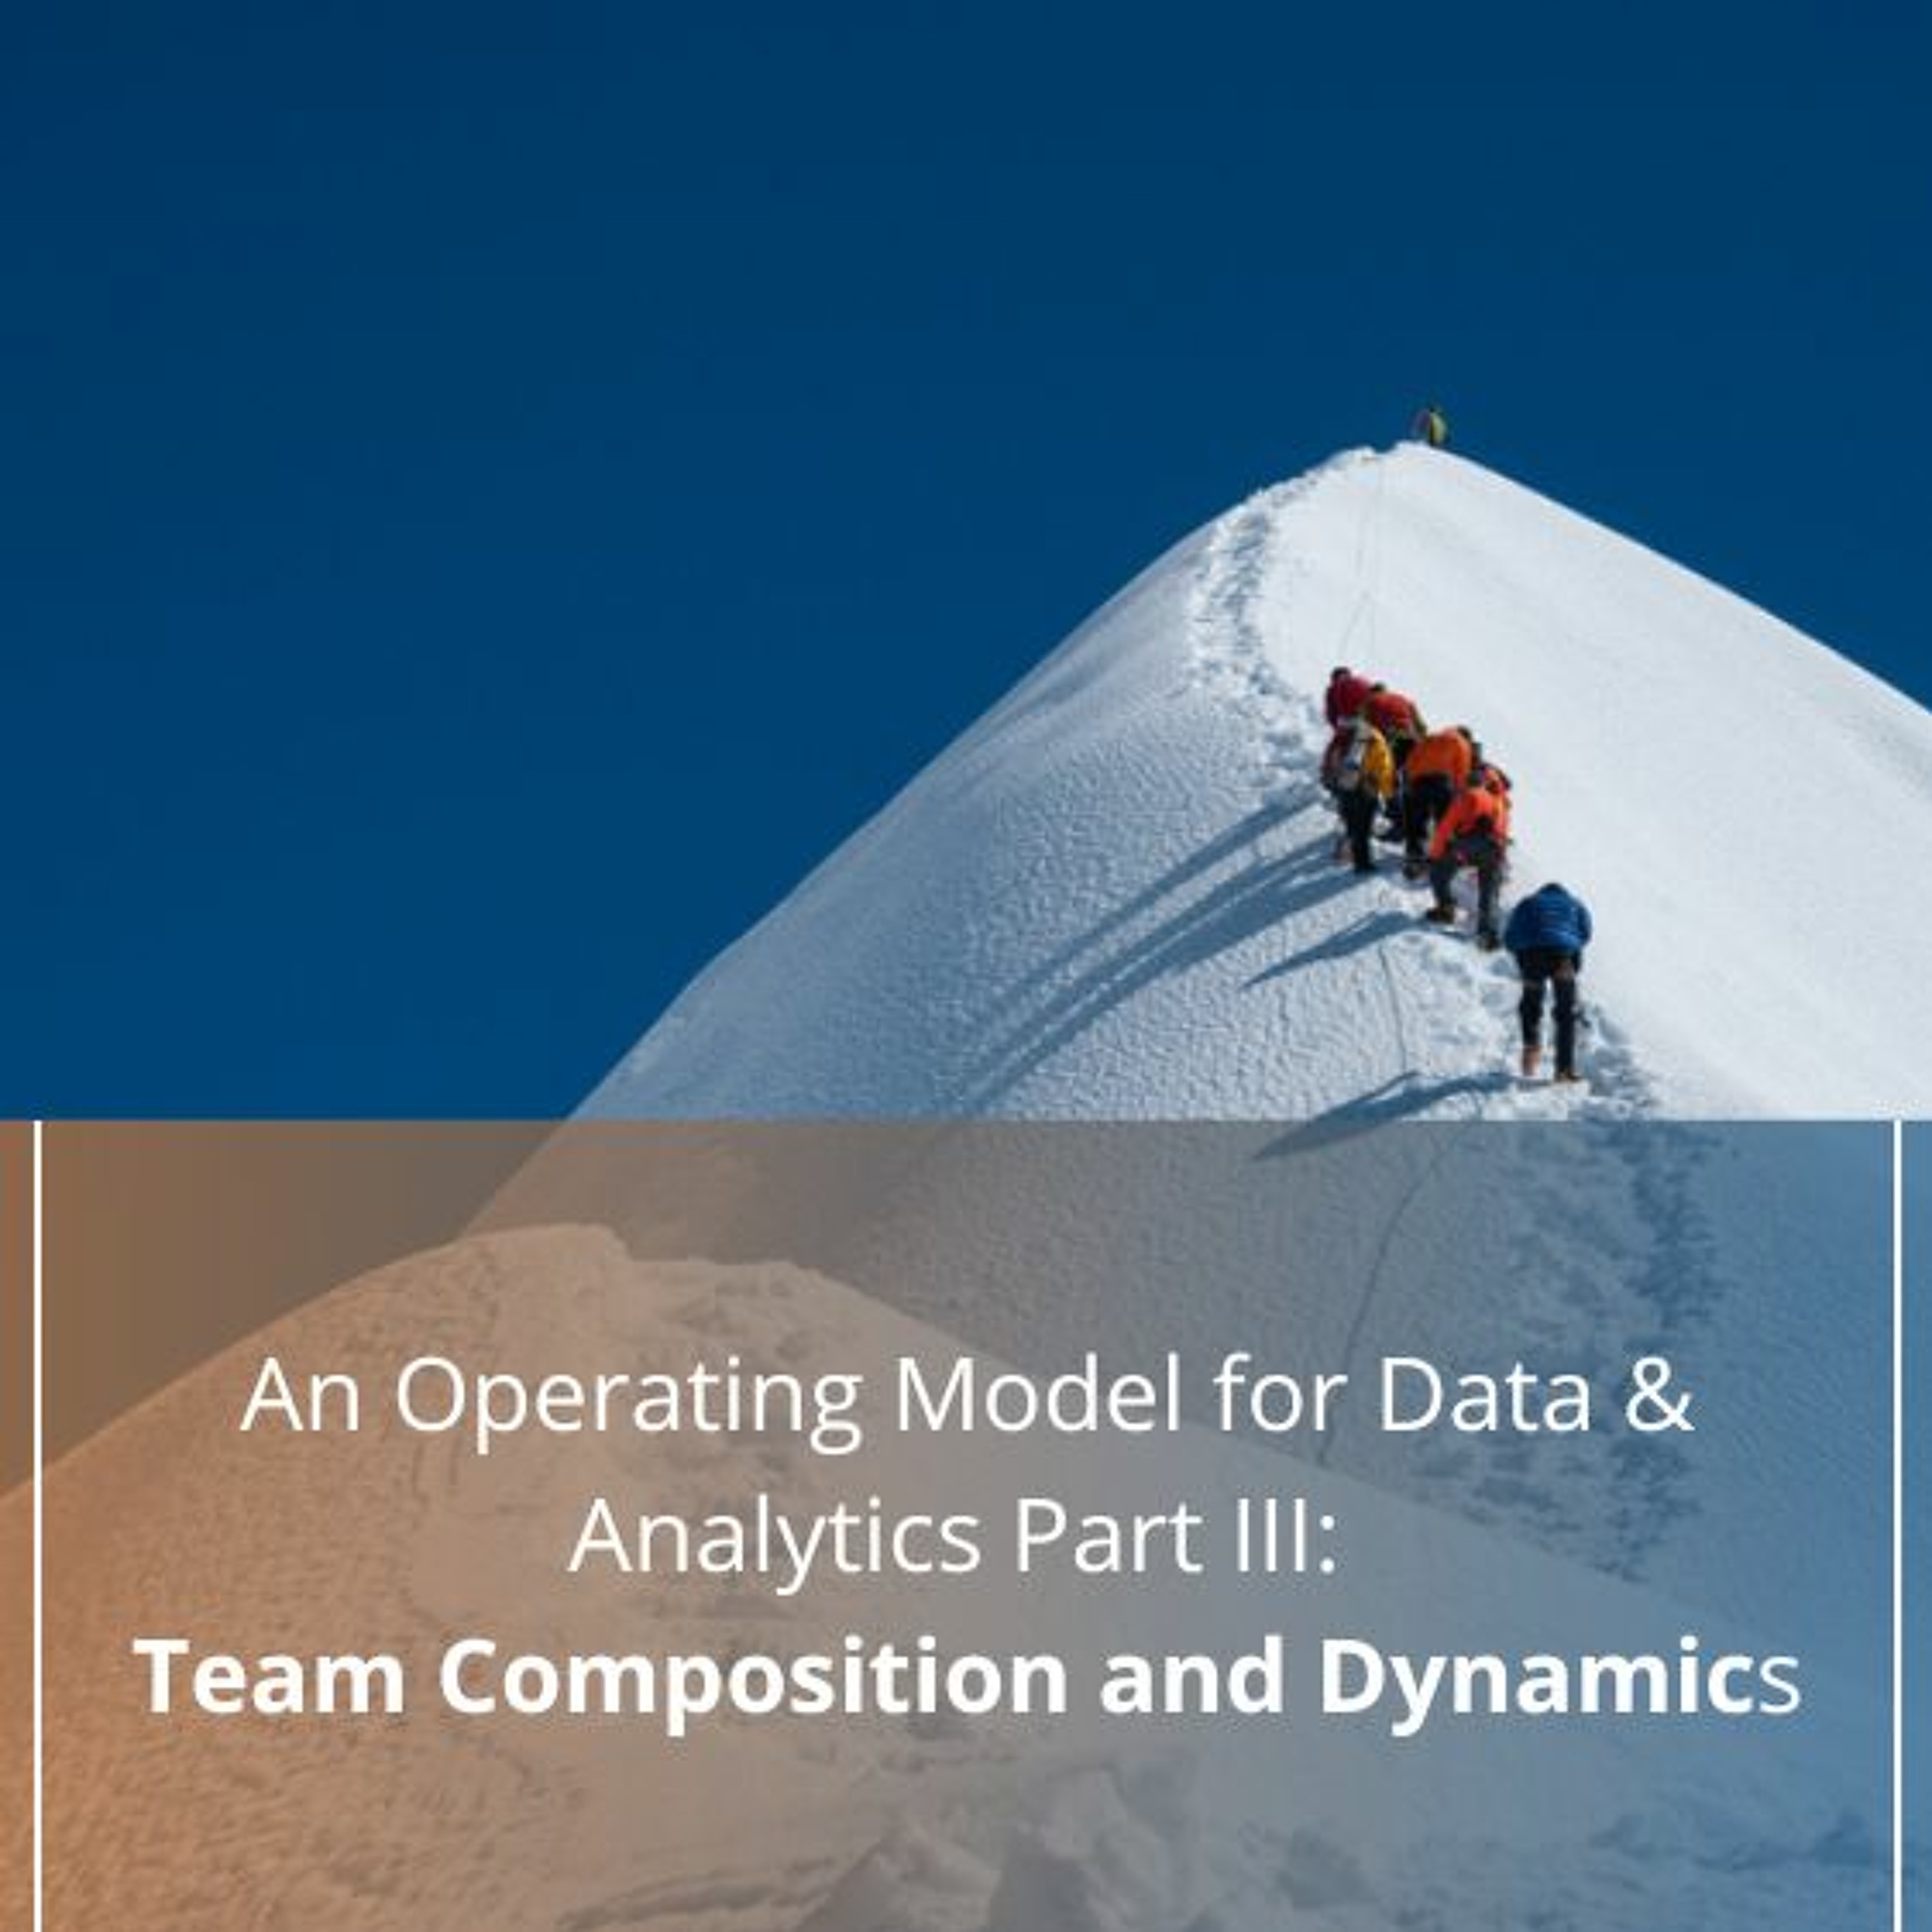 An Operating Model for Data & Analytics Part III: Team Composition and Dynamics - Audio Blog